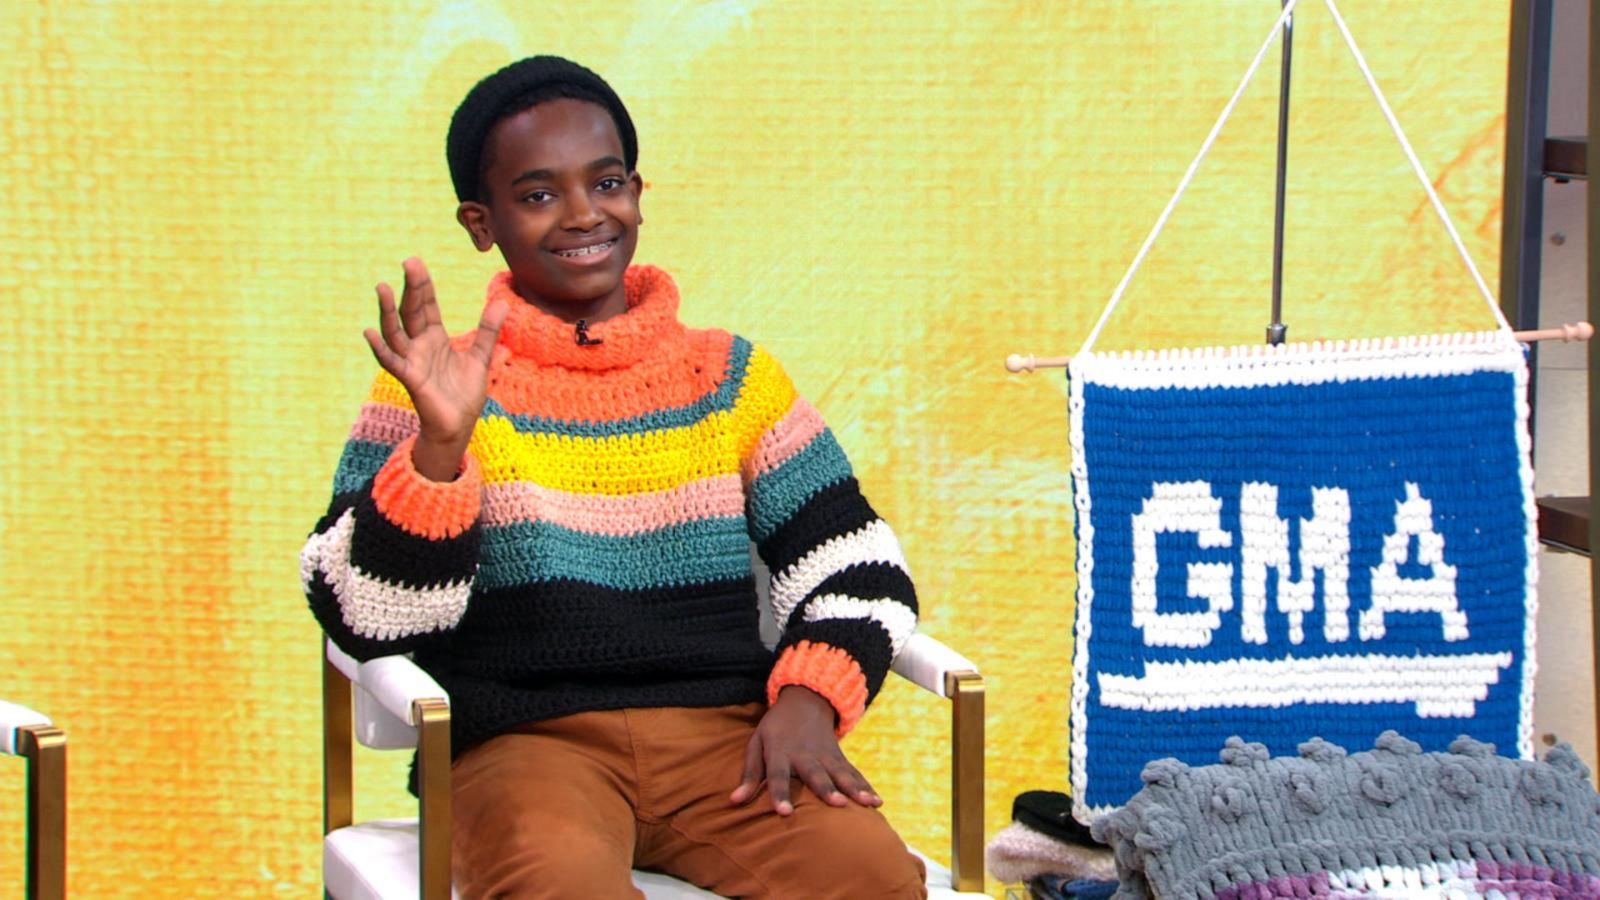 VIDEO: Teen prodigy shares incredible crochet creations